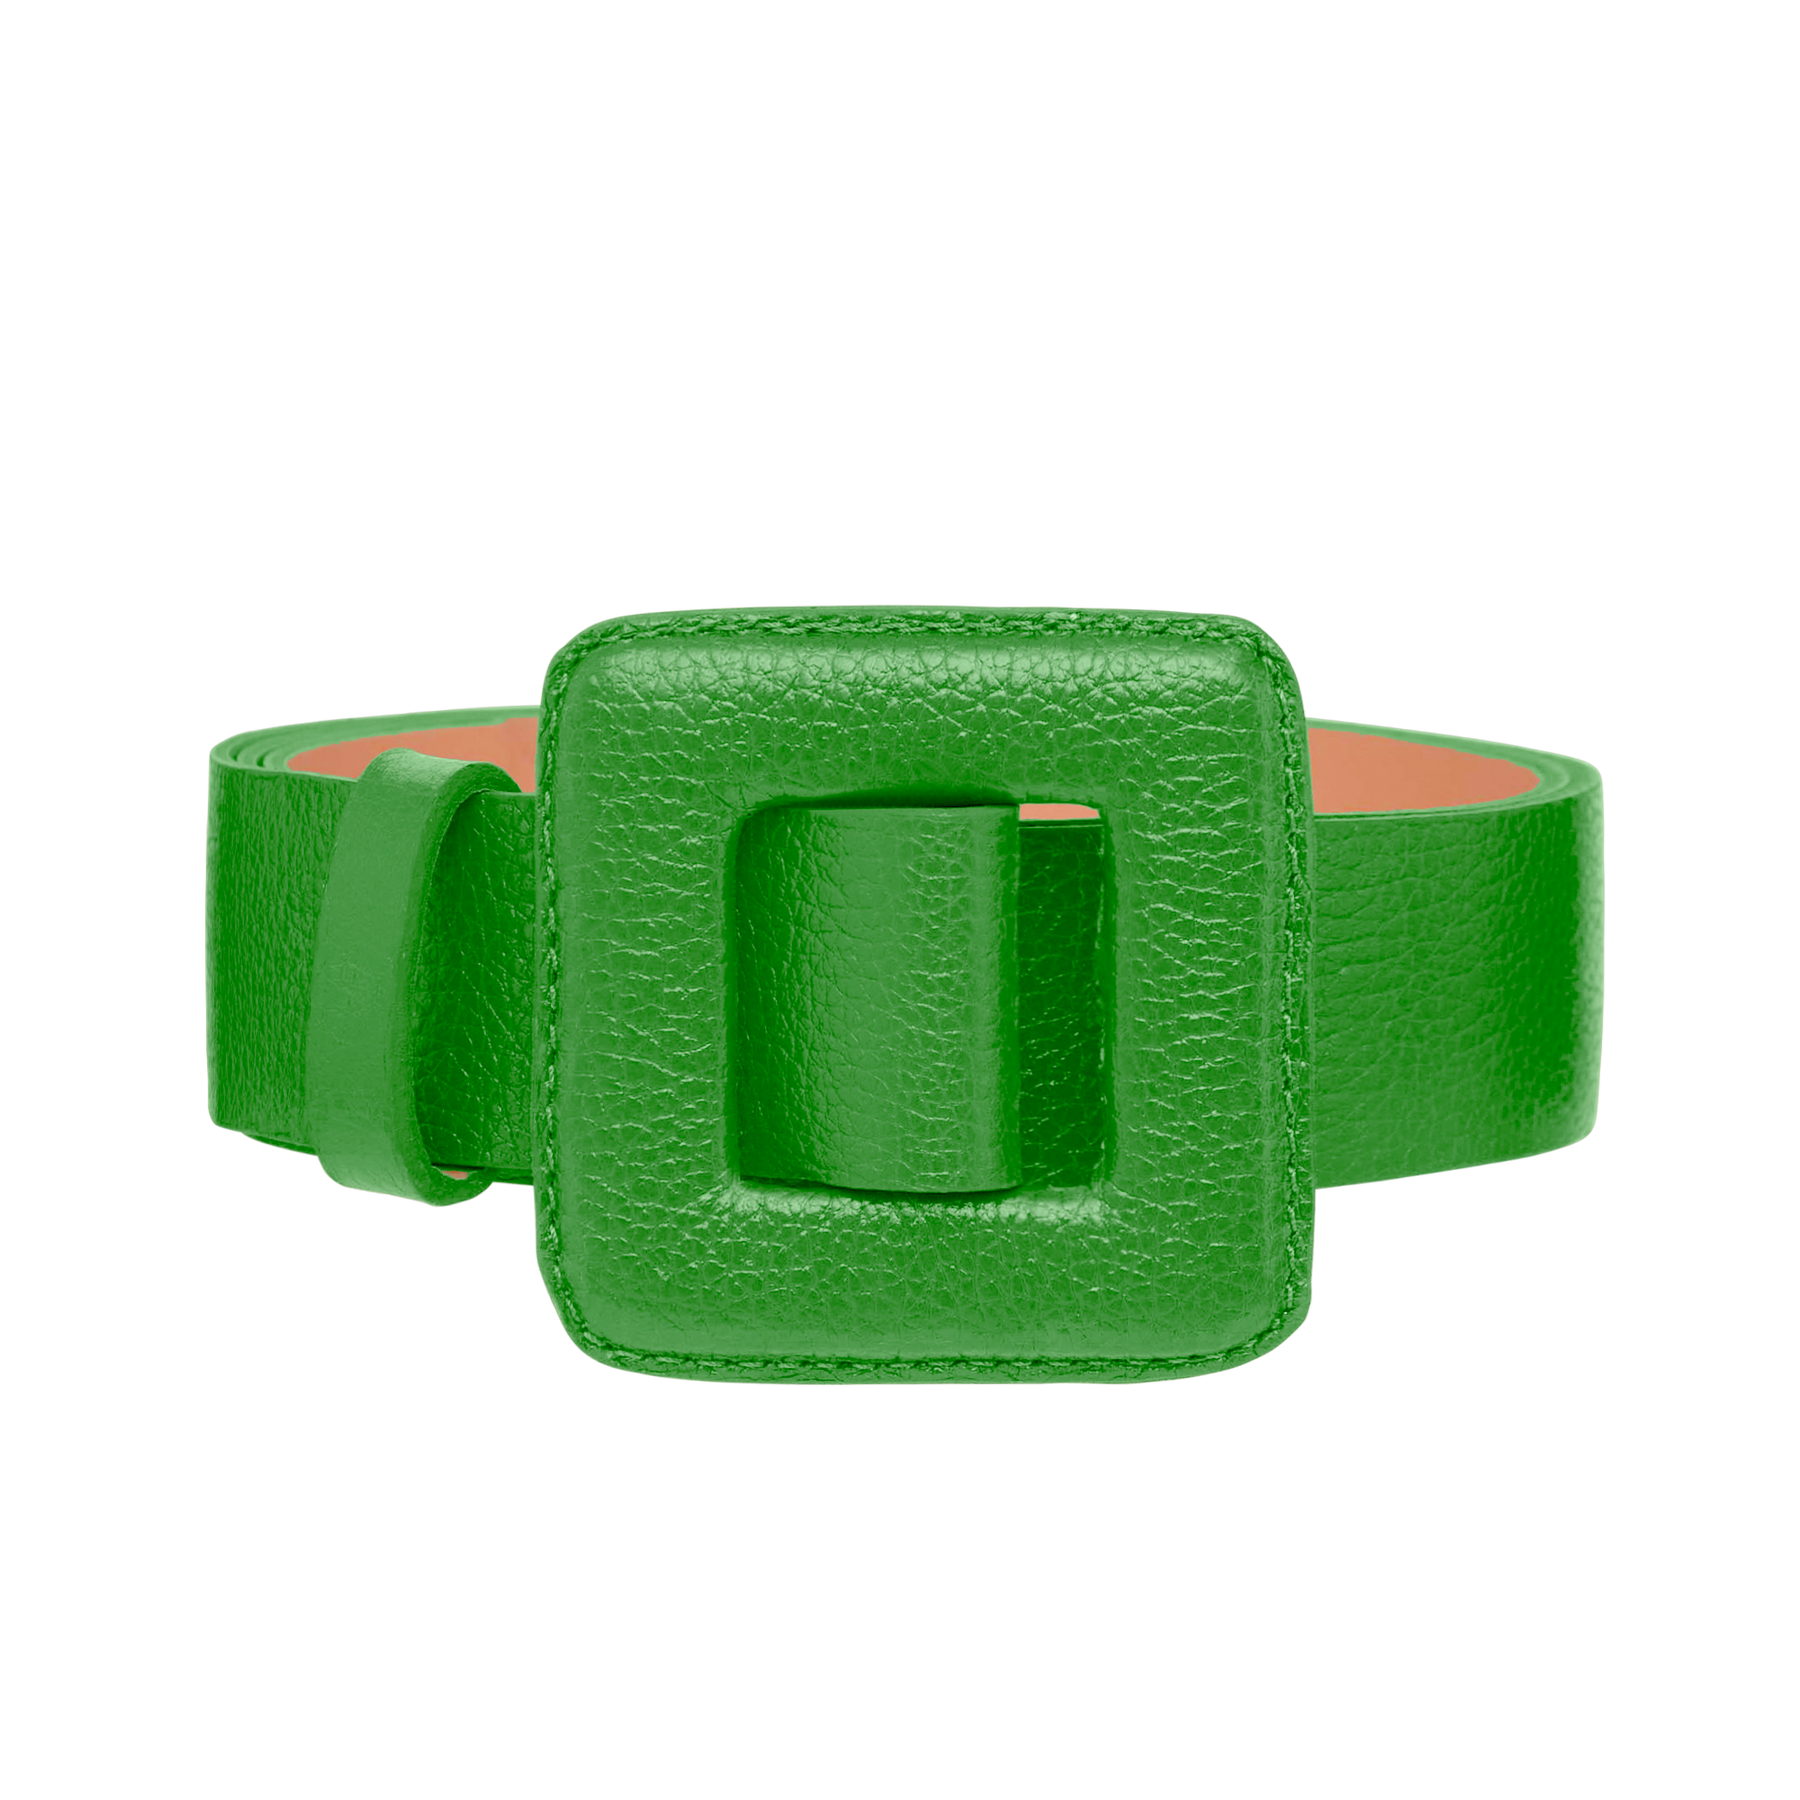 Women's Leather Belt - Floater Leather Belt in Bright Green with Midi ...